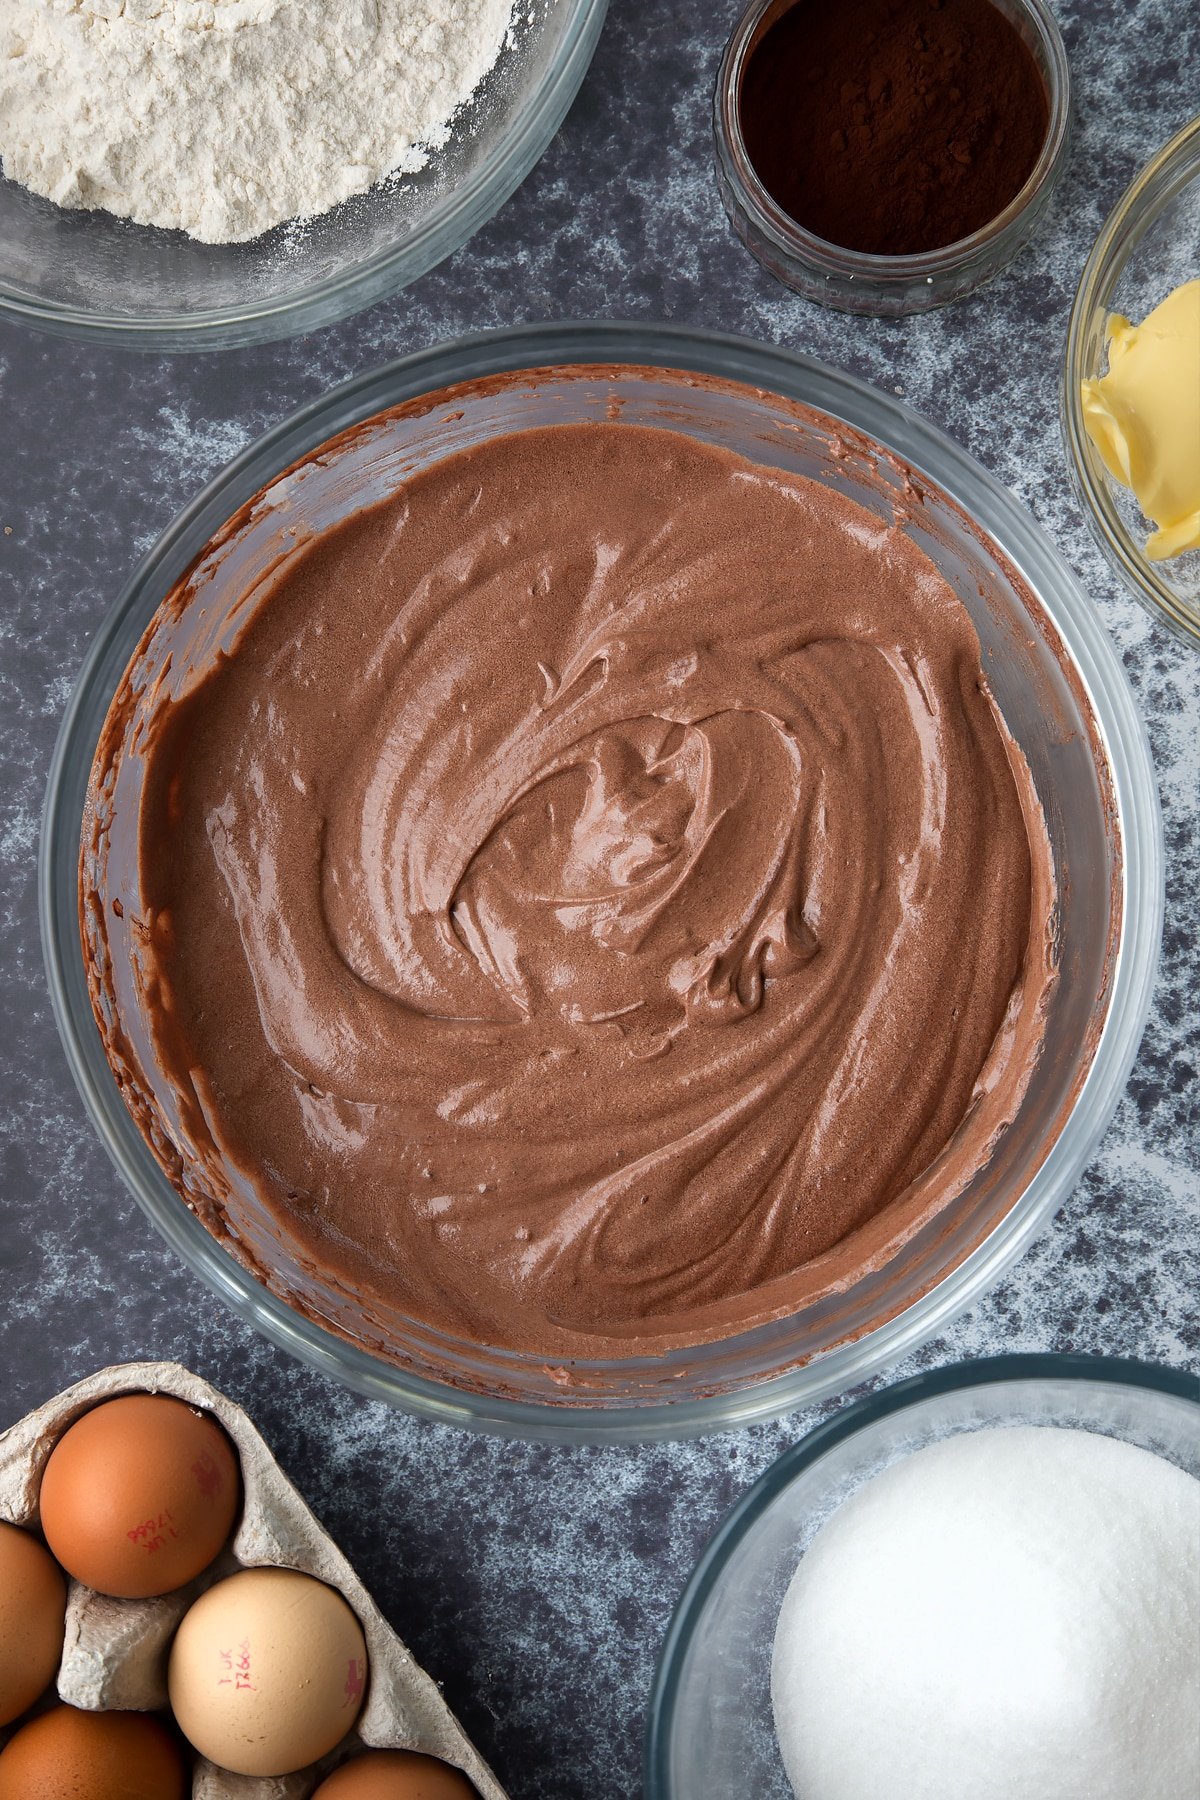 Chocolate cupcake batter in a large mixing bowl. Ingredients to make gory Halloween cupcakes surround the bowl.